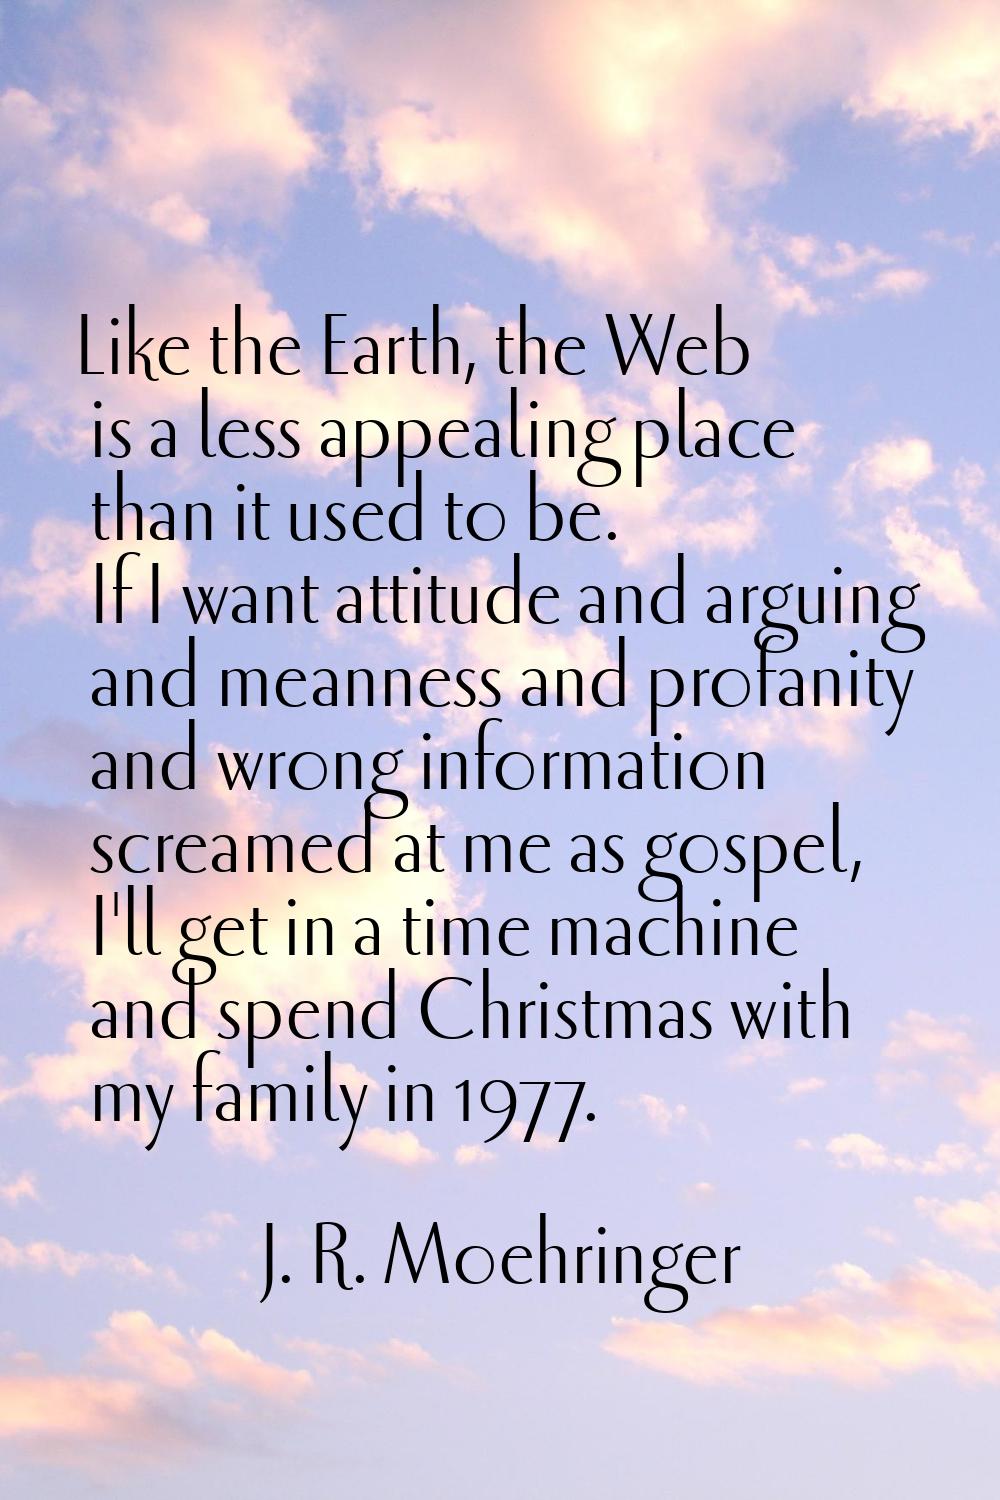 Like the Earth, the Web is a less appealing place than it used to be. If I want attitude and arguin